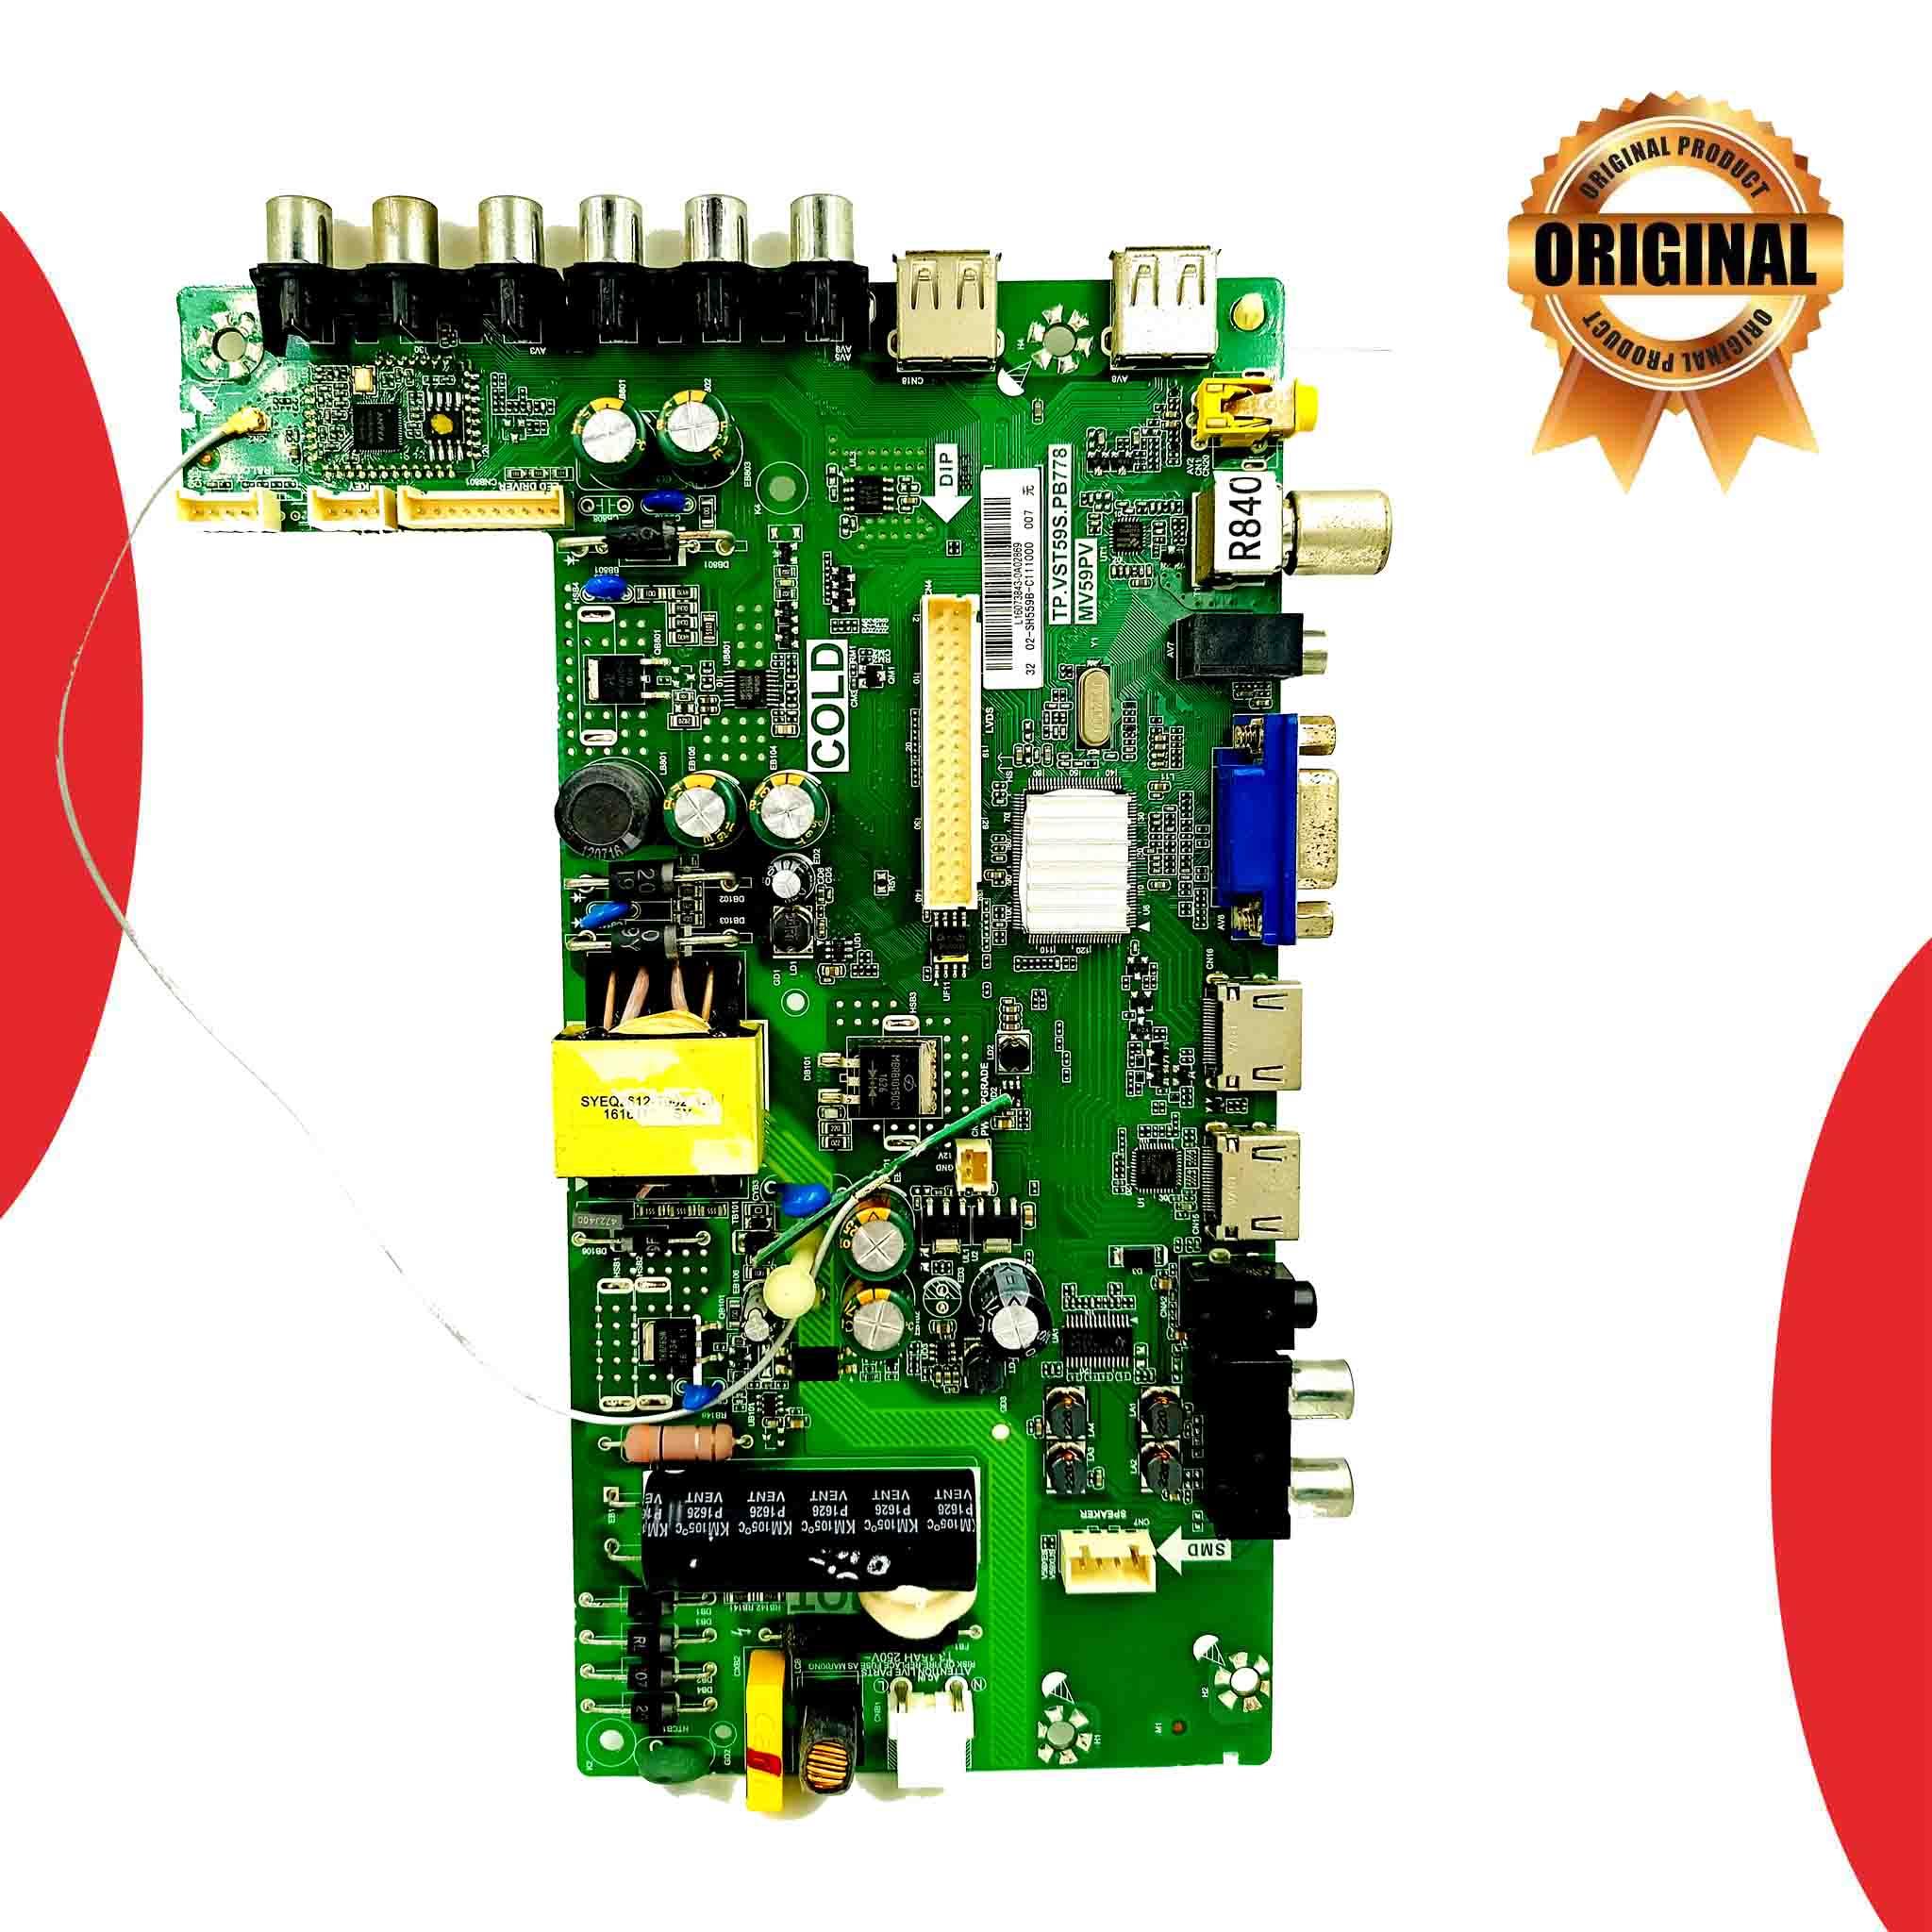 Model 32T7290MHO Micromax LED TV Motherboard - Great Bharat Electronics